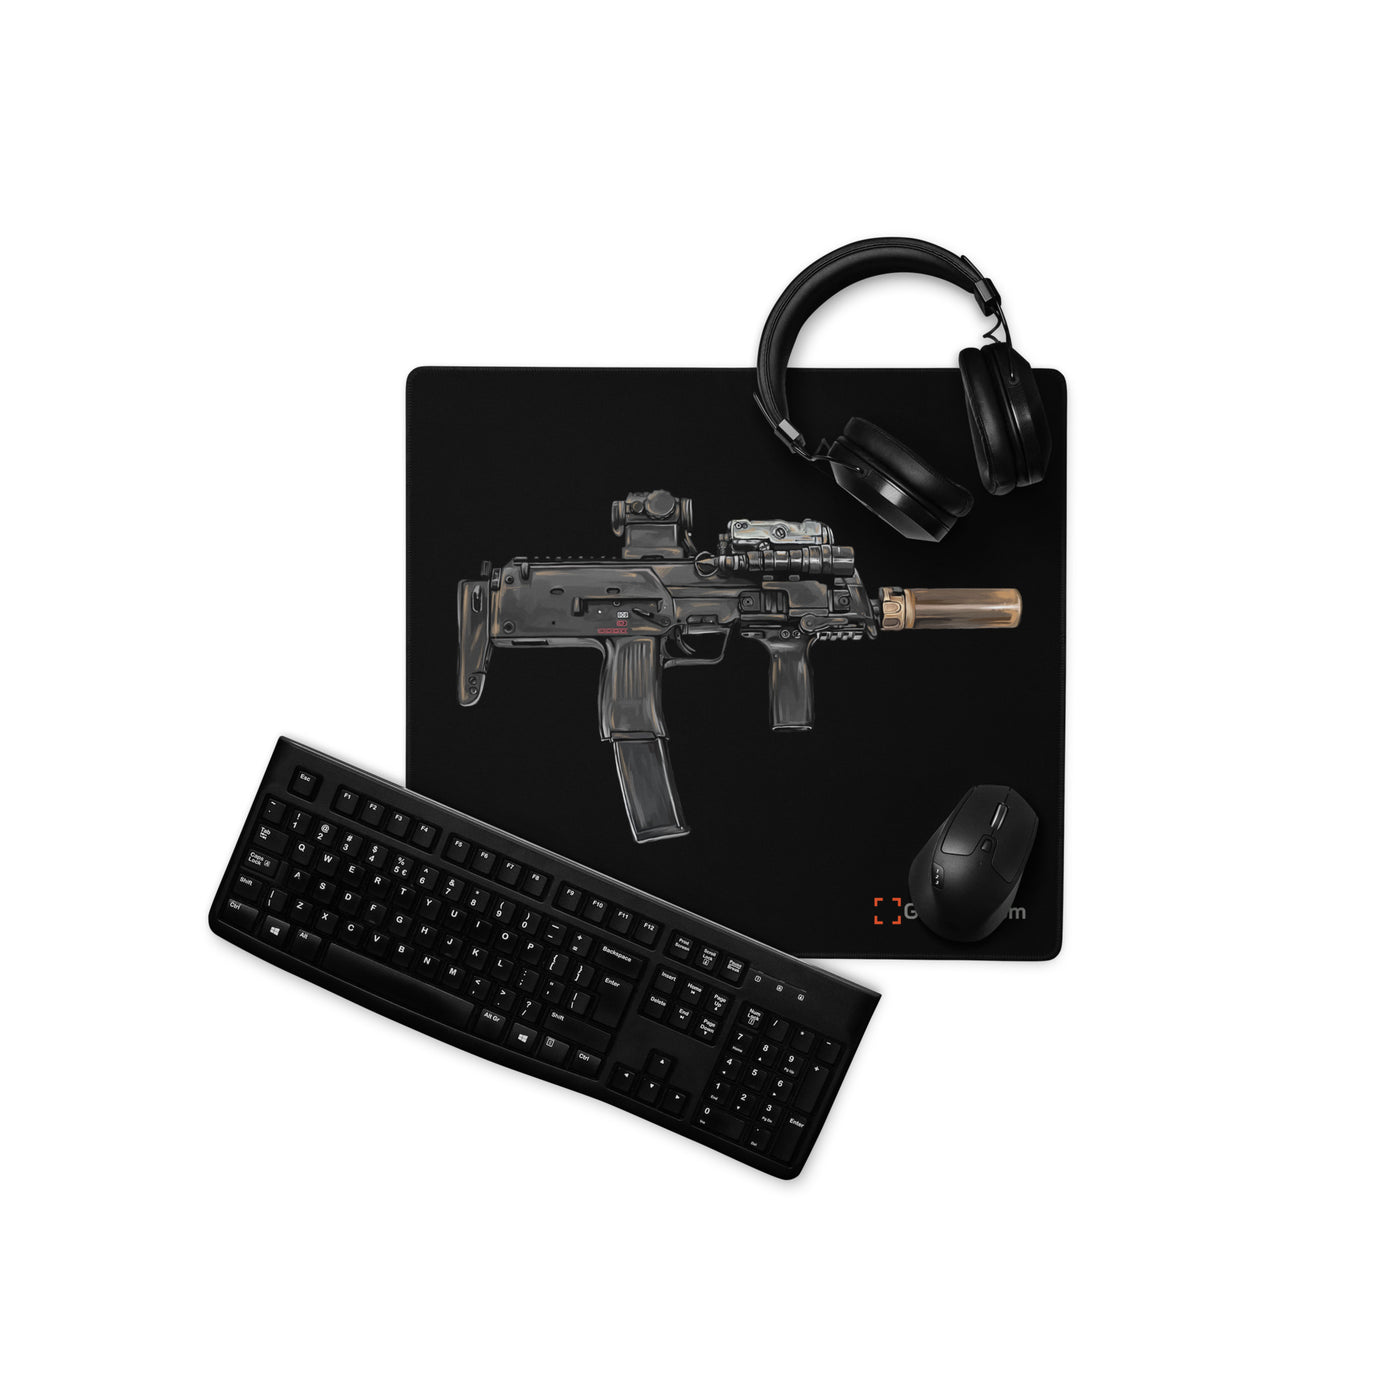 German 4.6x30mm Sub Machine Gun Gaming Mouse Pad - Just The Piece - Black Background